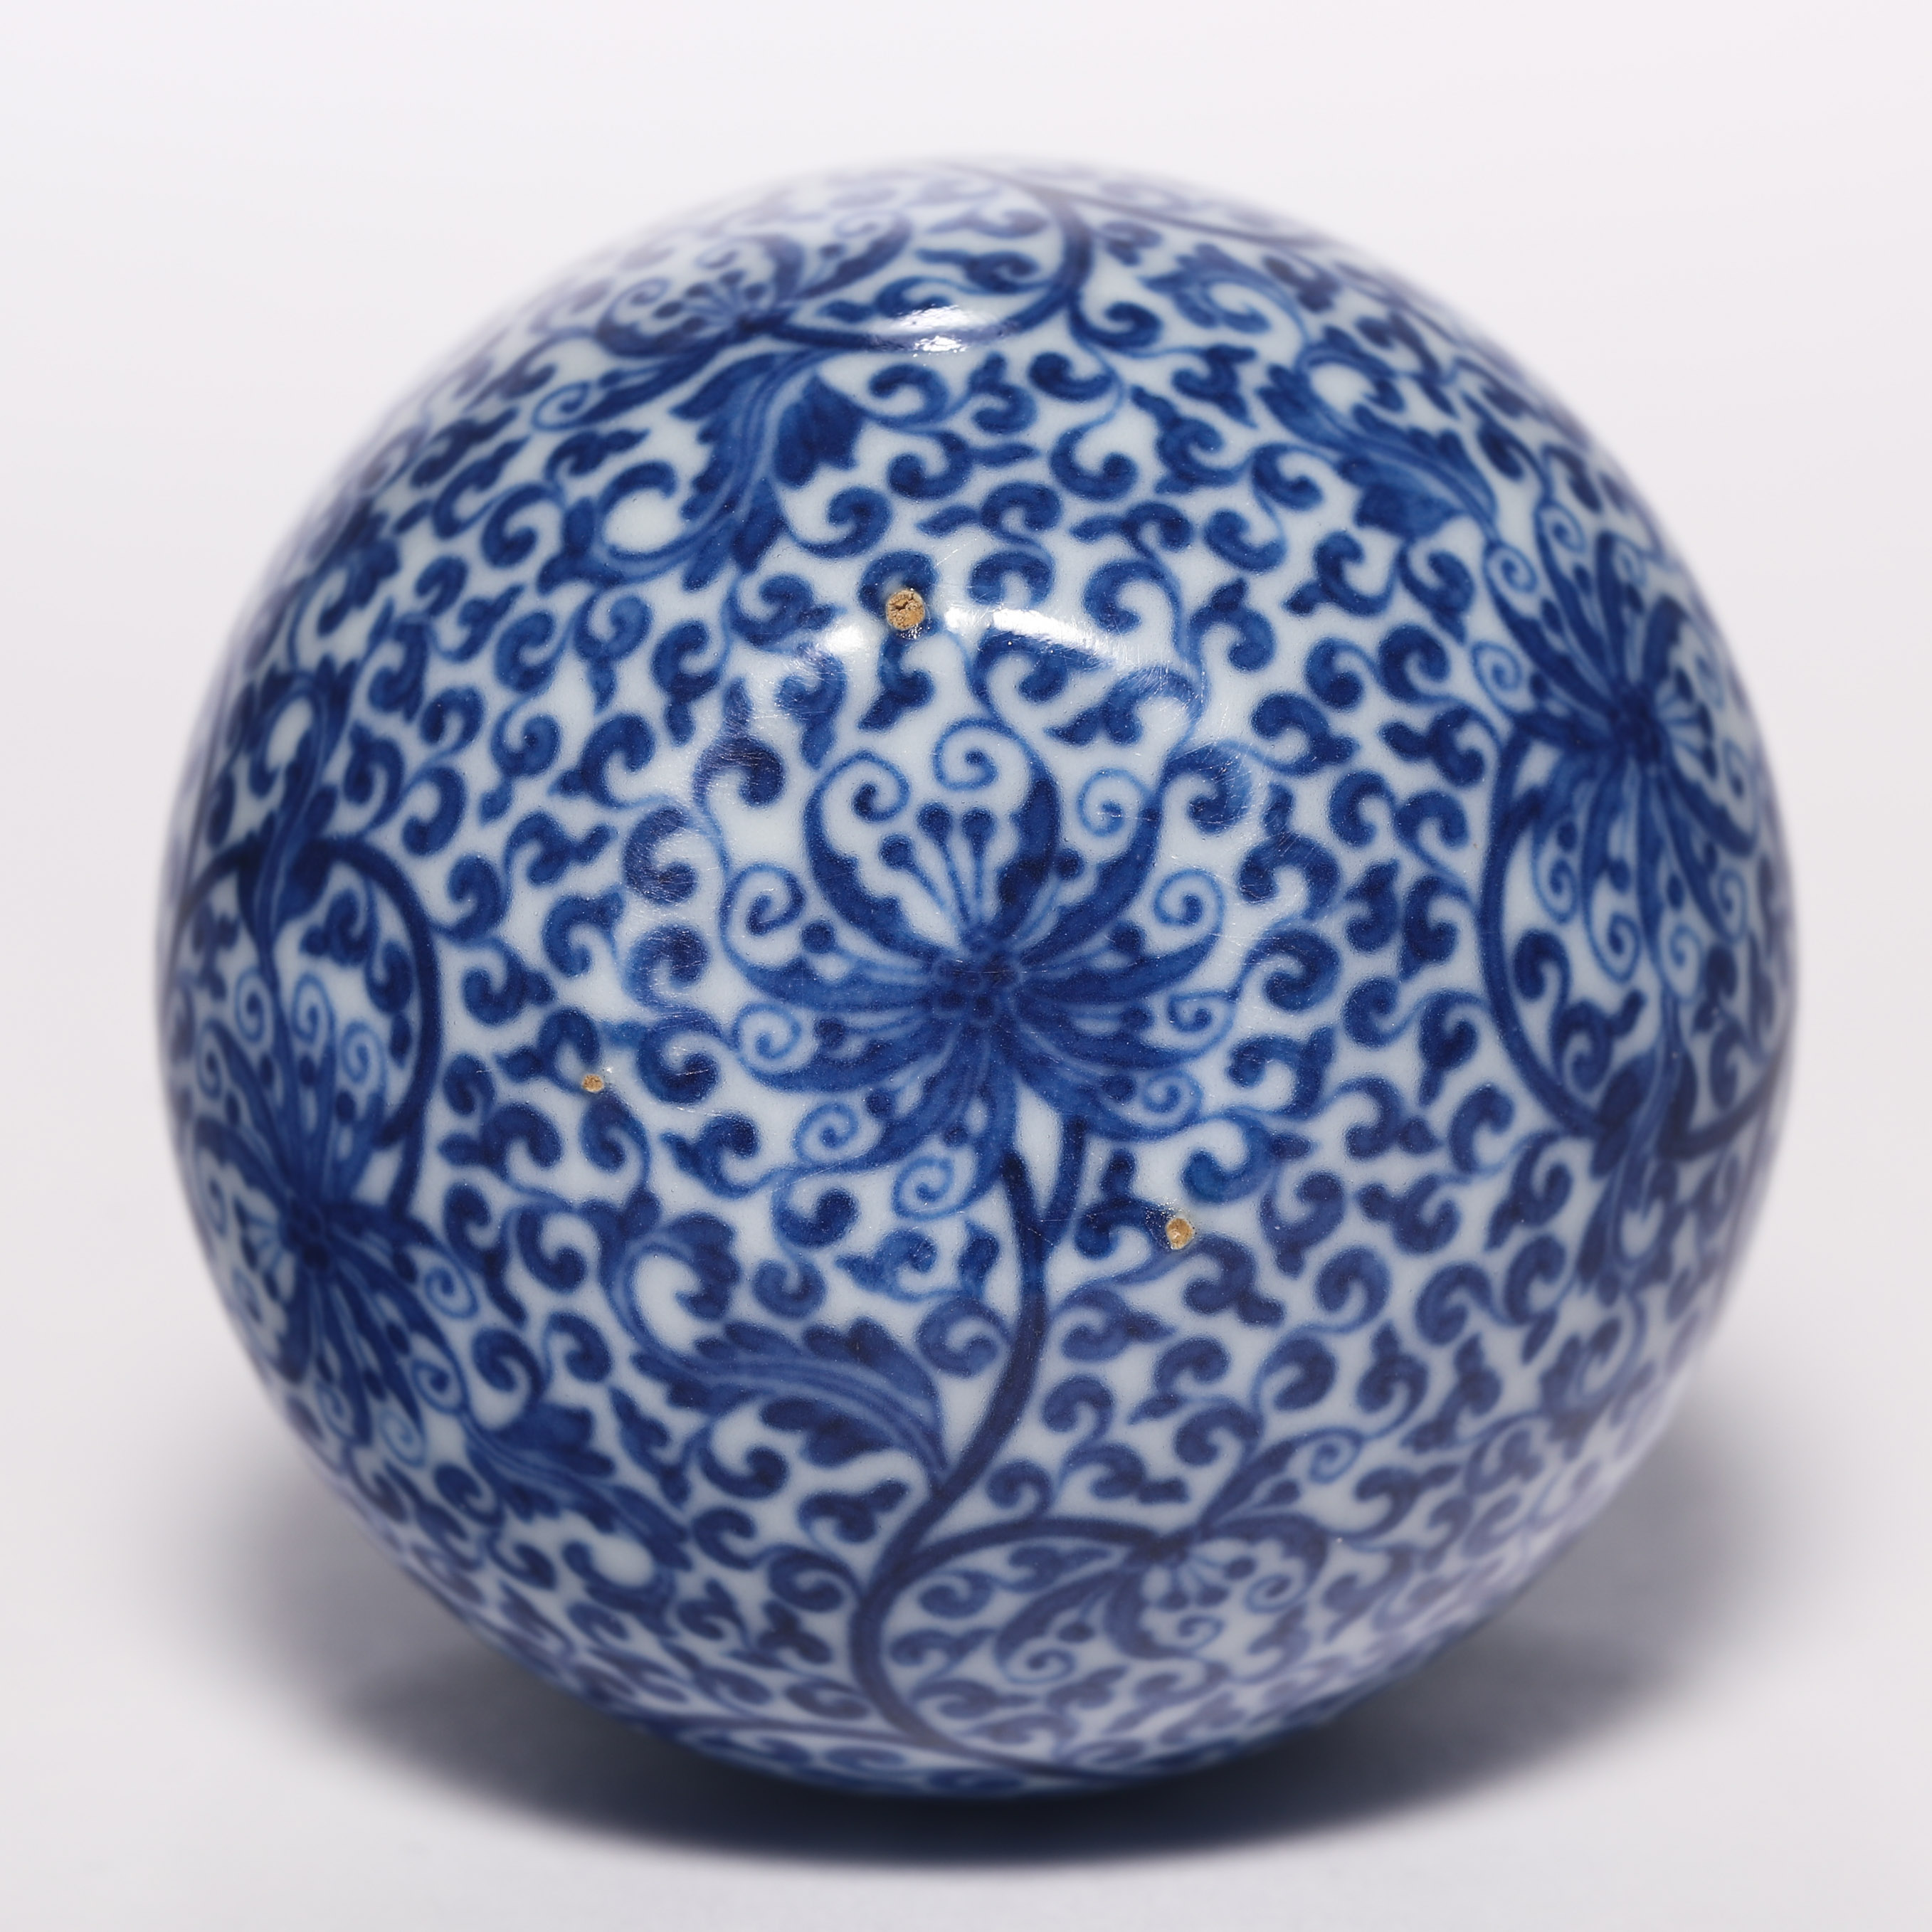 Qing dynasty blue-and-white lotus water bowl - Image 6 of 6